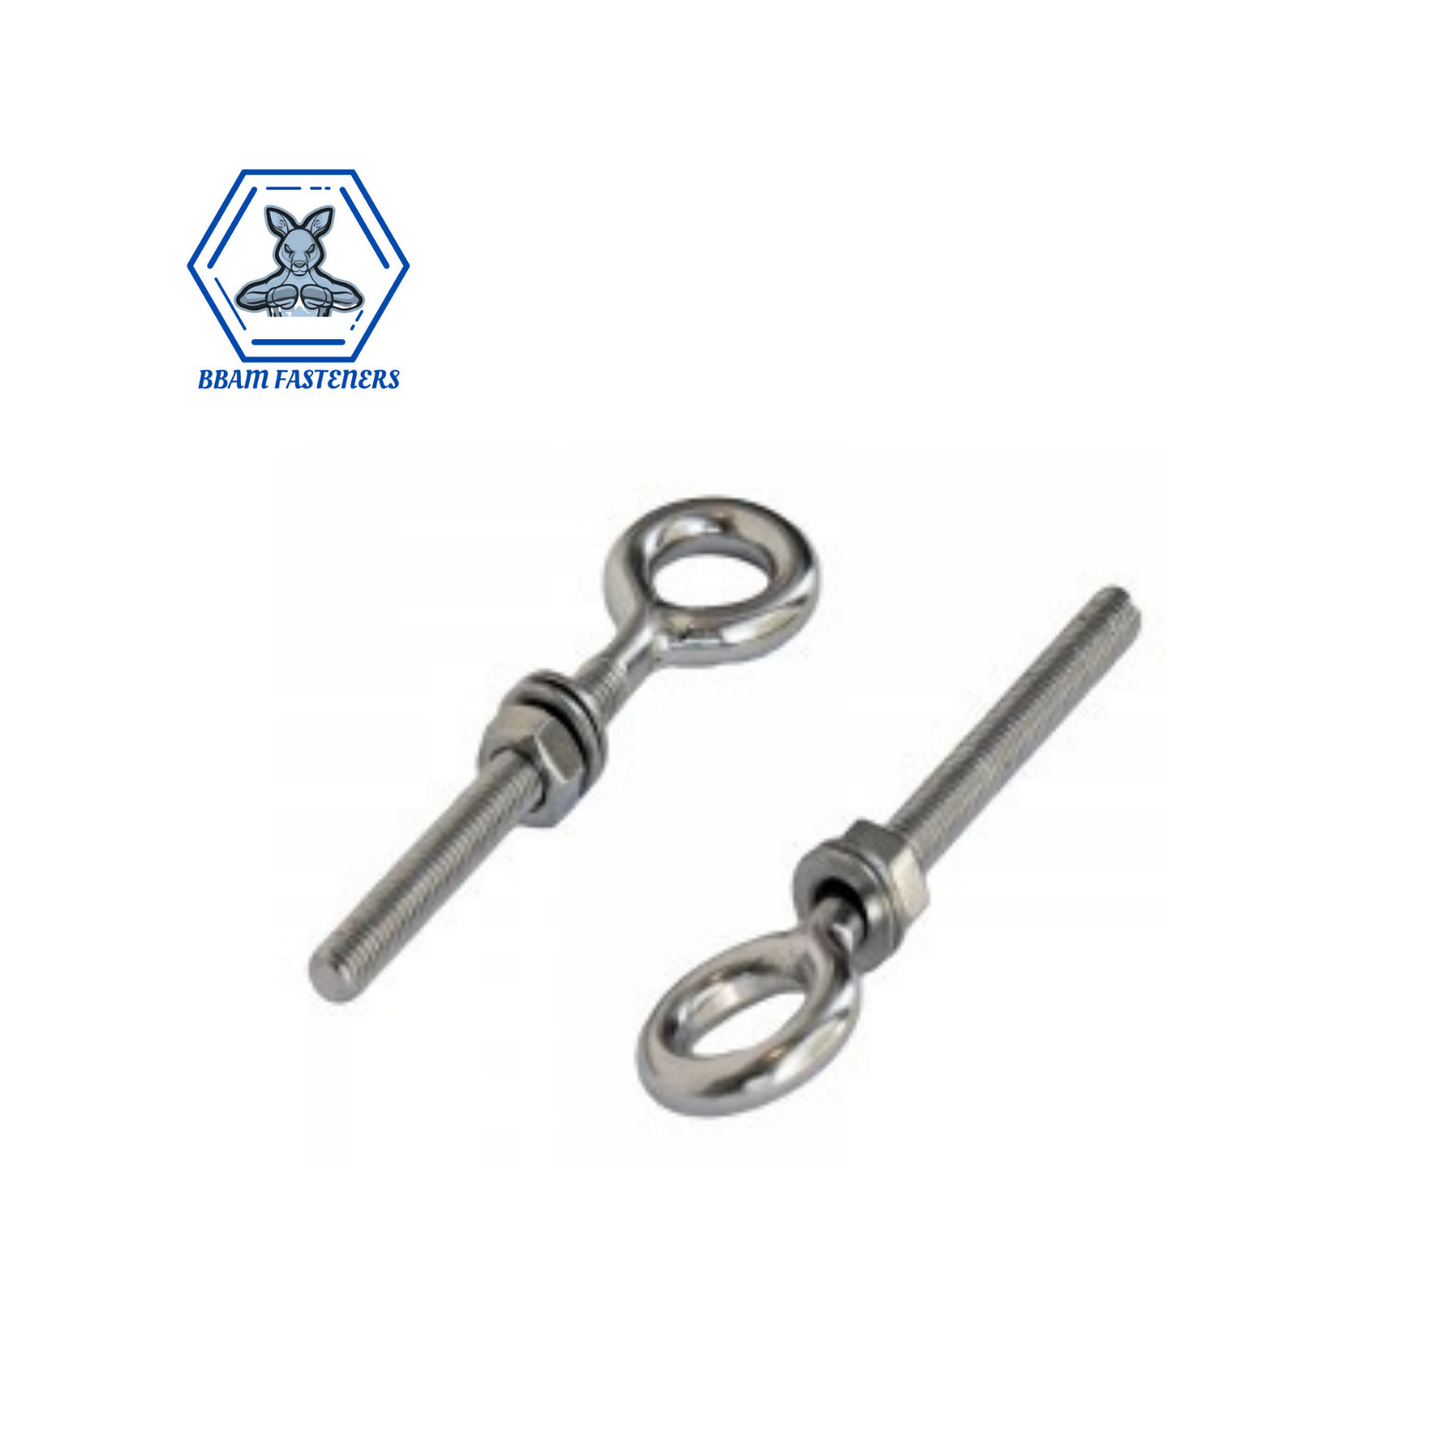 M6 x 80mm Eyebolt with Nut & Washer Stainless Steel